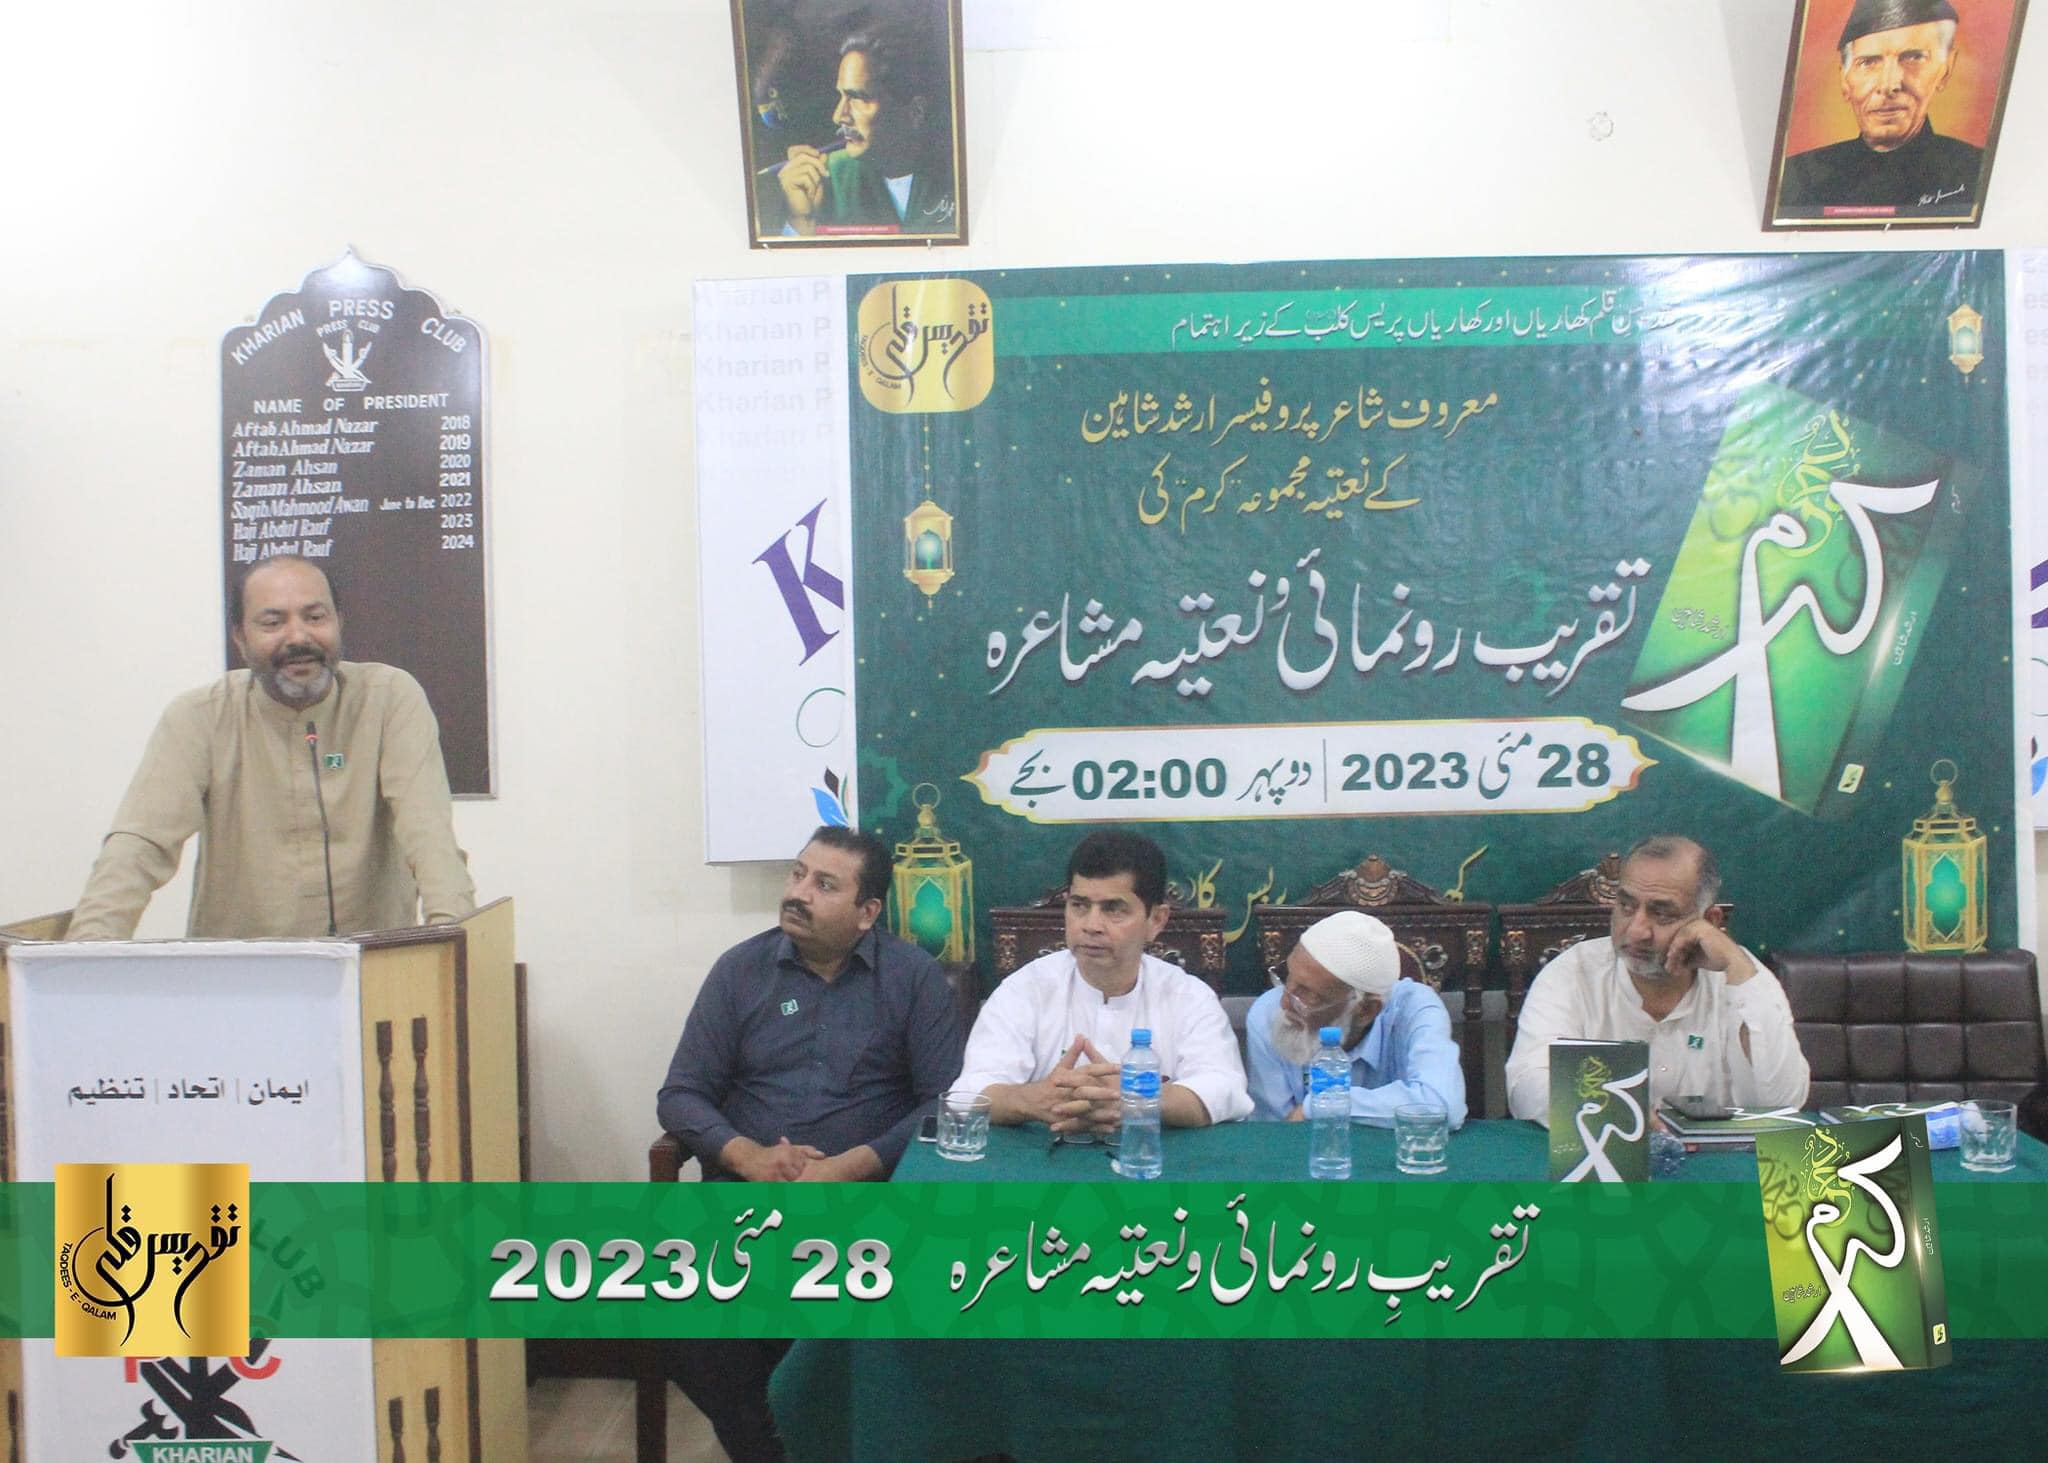 "Karam" Naat Collection Unveiled, Celebrating Poetry and Devotion at Press Club Khariyan